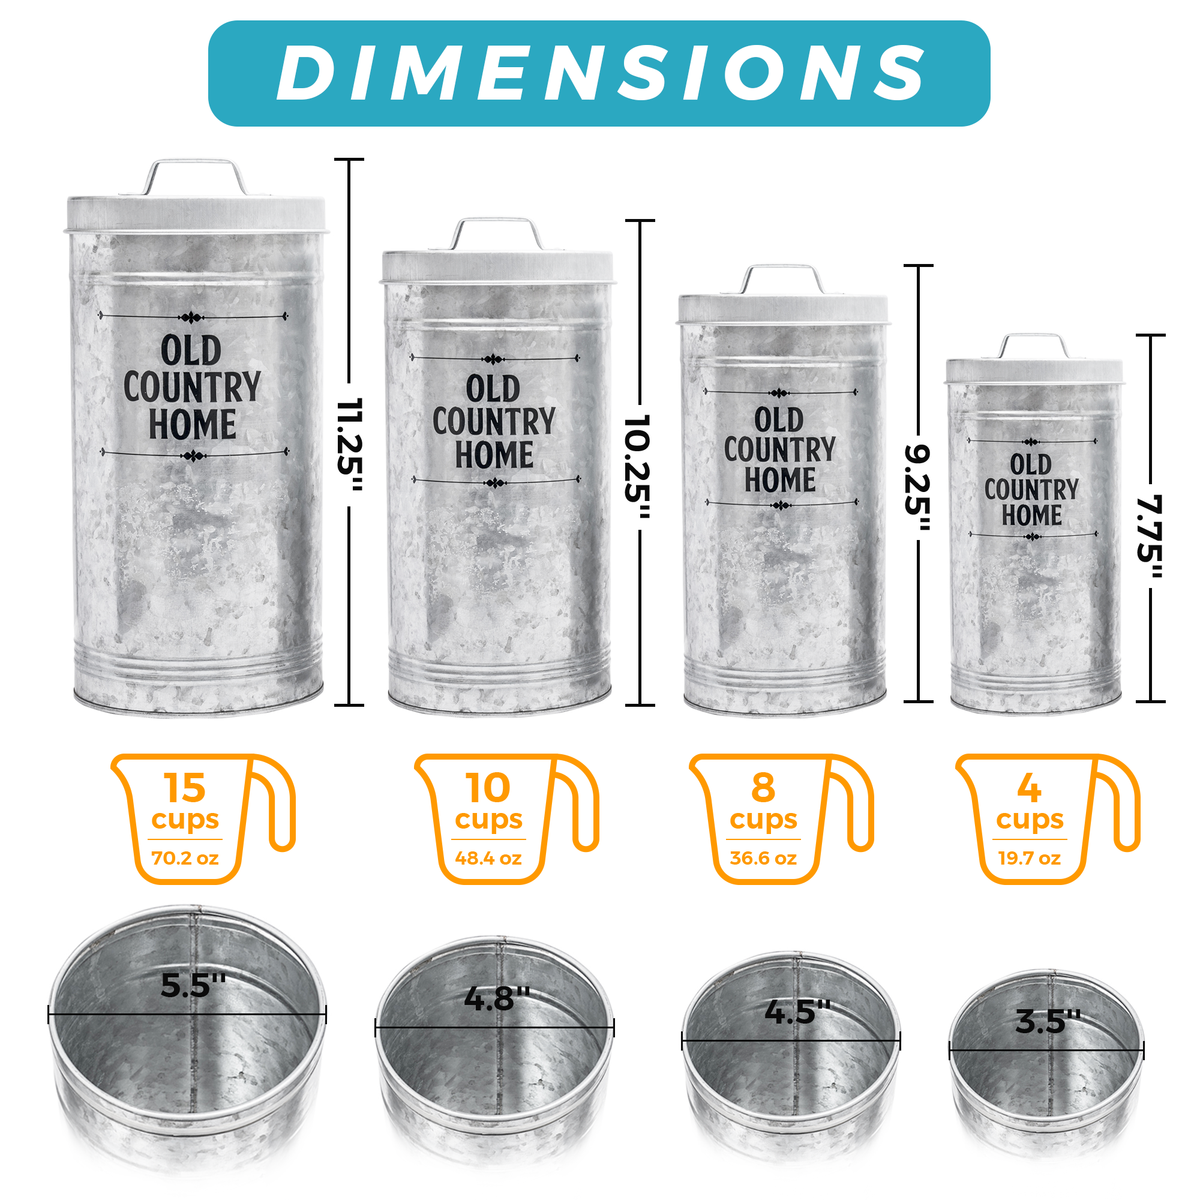 Nesting galvanized canisters set showing dimensions and capacity of each canister